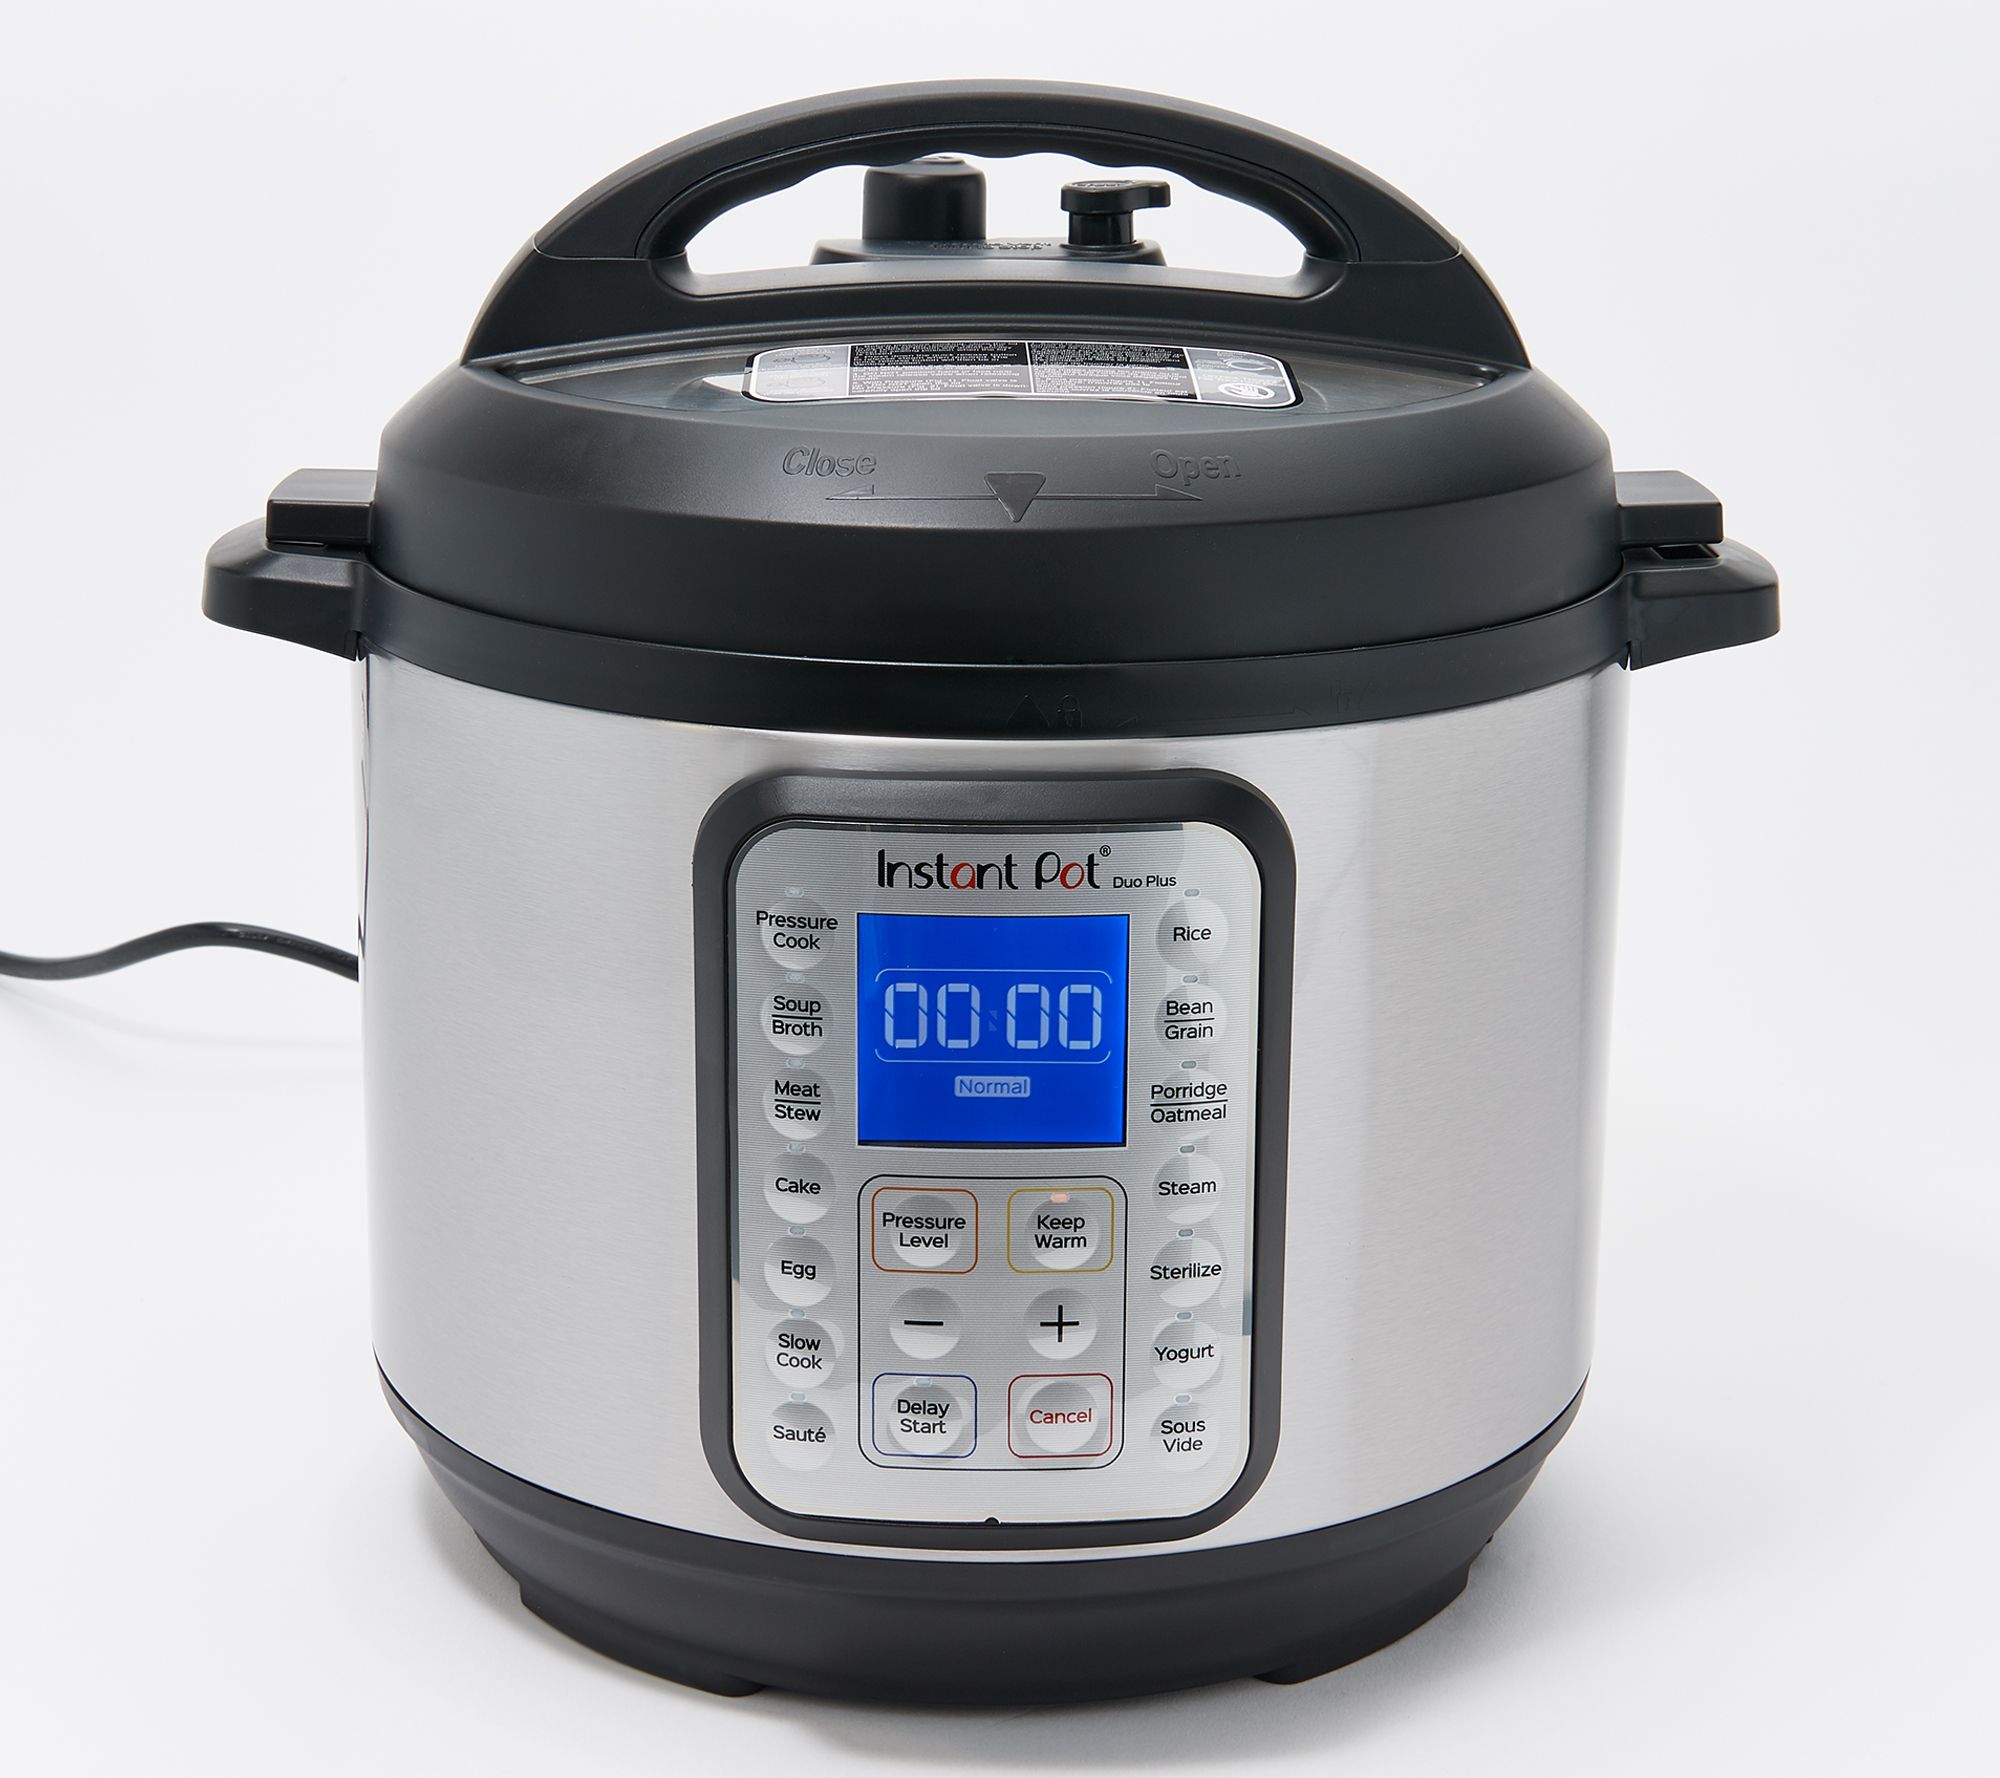 Instant Pot 6-qt Duo Plus 9-in-1 Pressure Cooker with Glass Lid